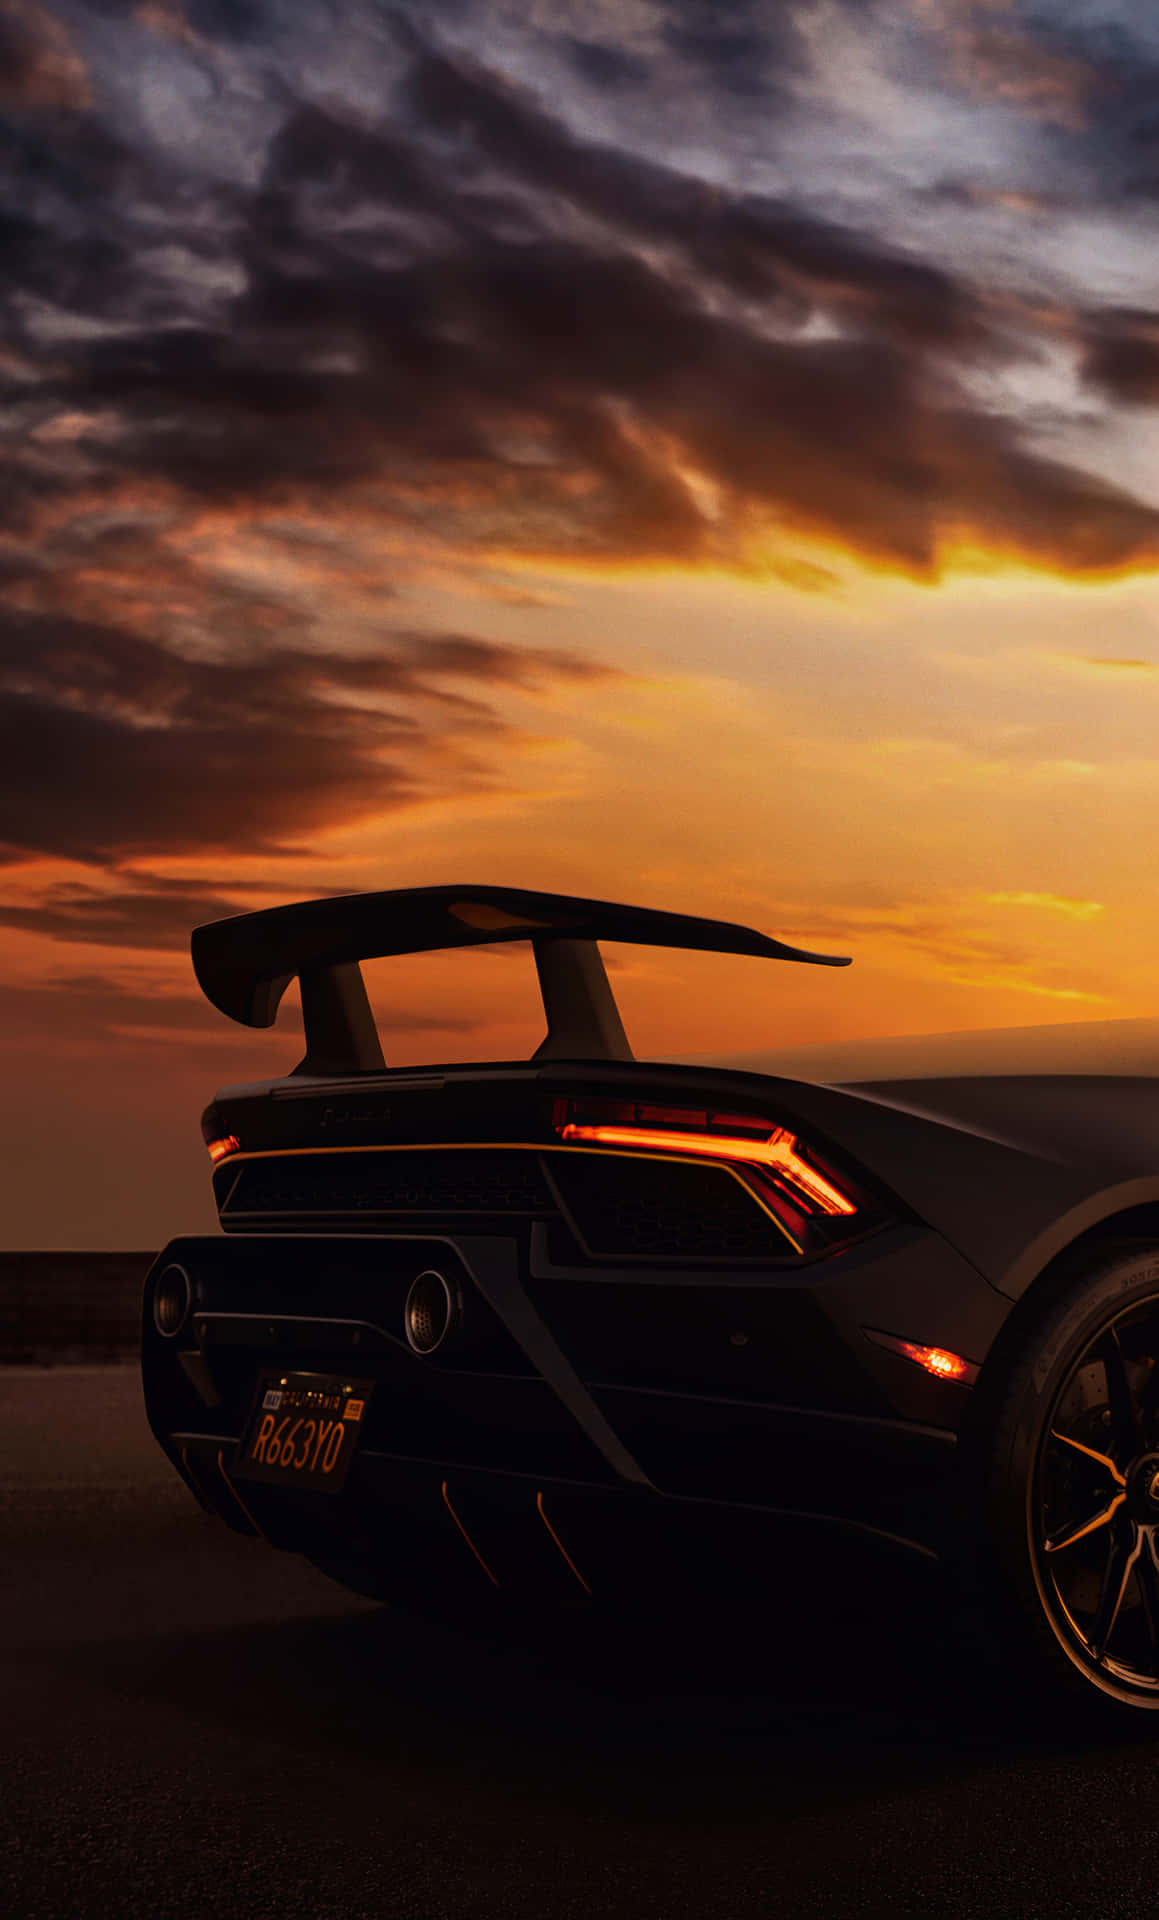 A Black Sports Car Is Parked In The Sunset Wallpaper